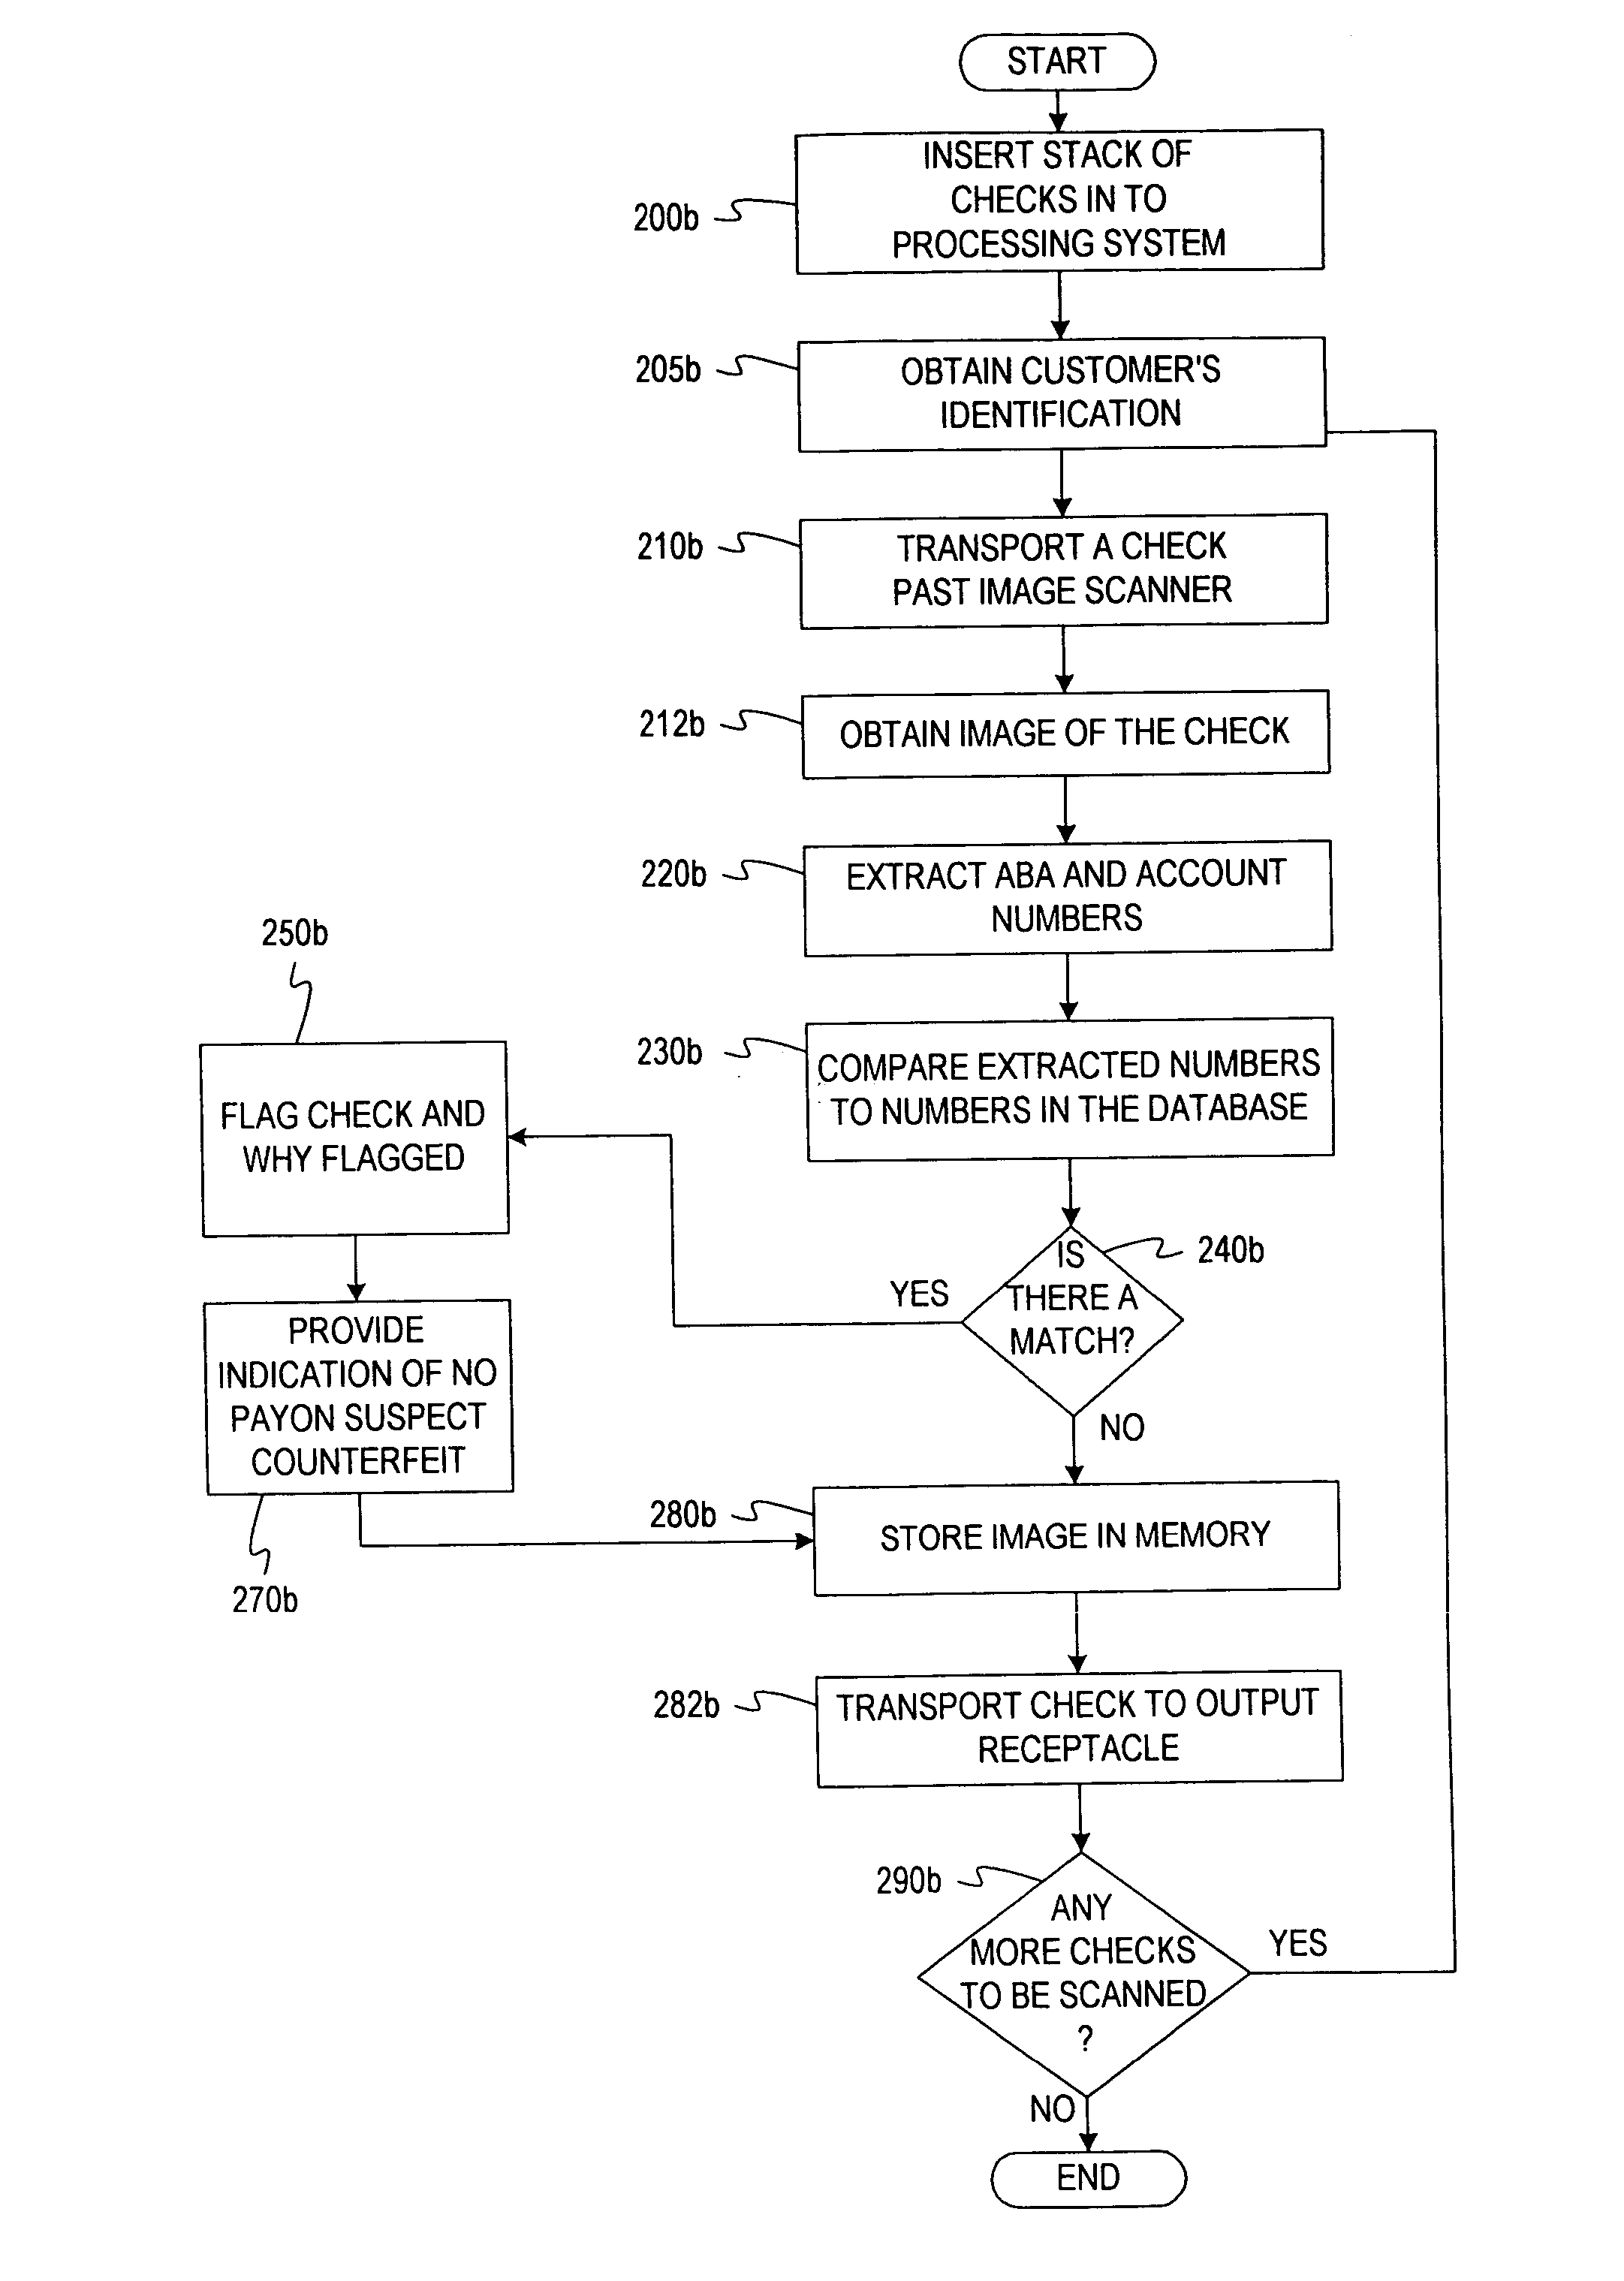 Document processing system using full image scanning